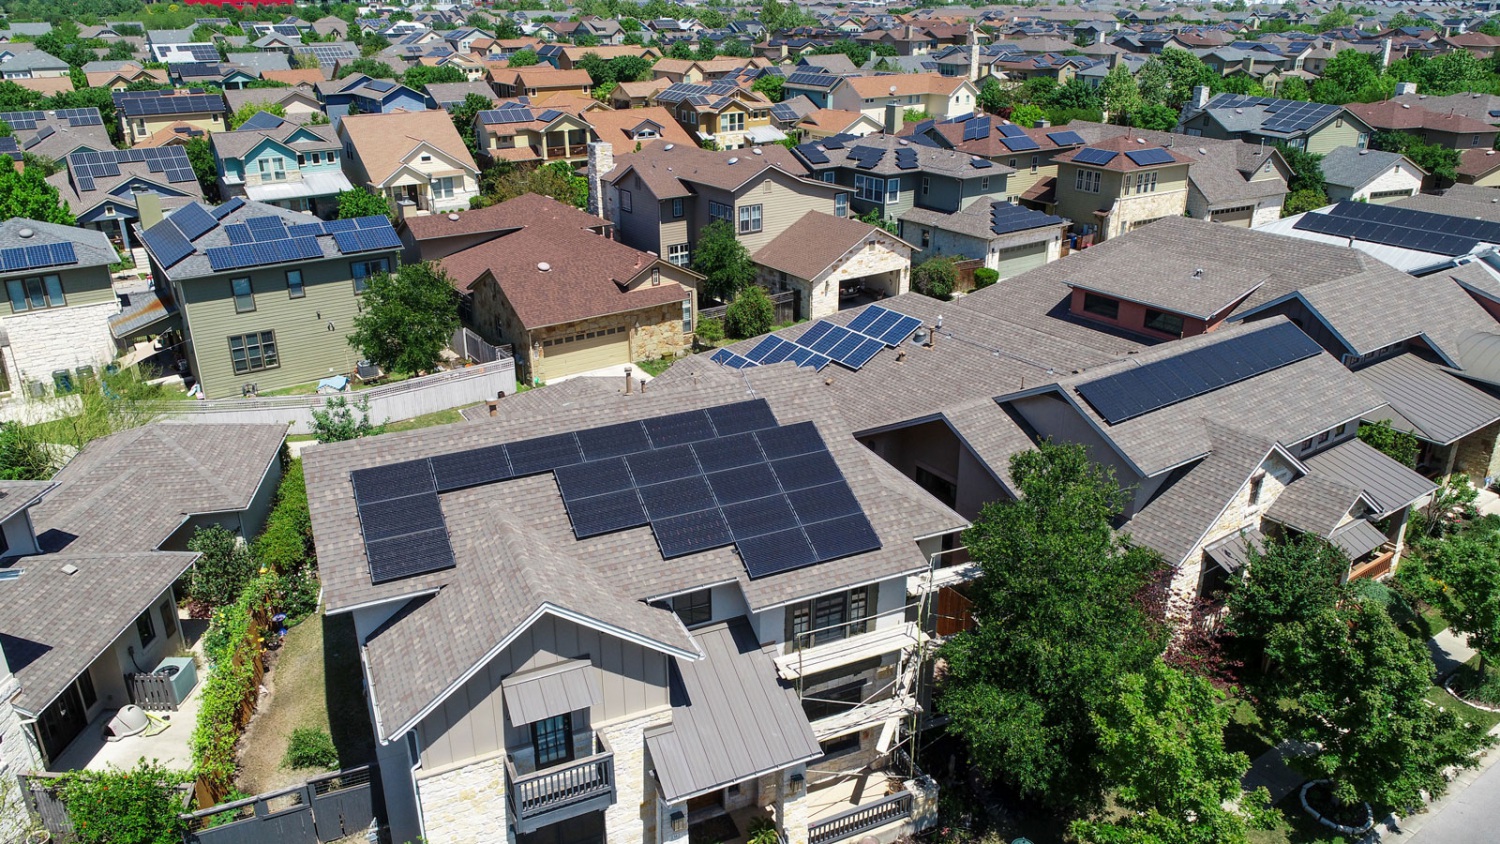 <h4>Homes Go Solar</h4><h5>Our Homes Go Solar campaign is urging state leaders to make solar standard on all new homes — because every new home built without solar panels is a missed opportunity to reduce pollution and leave our children a more livable planet.</h5><em>Roschetzky Photography via Shutterstock.com</em> 